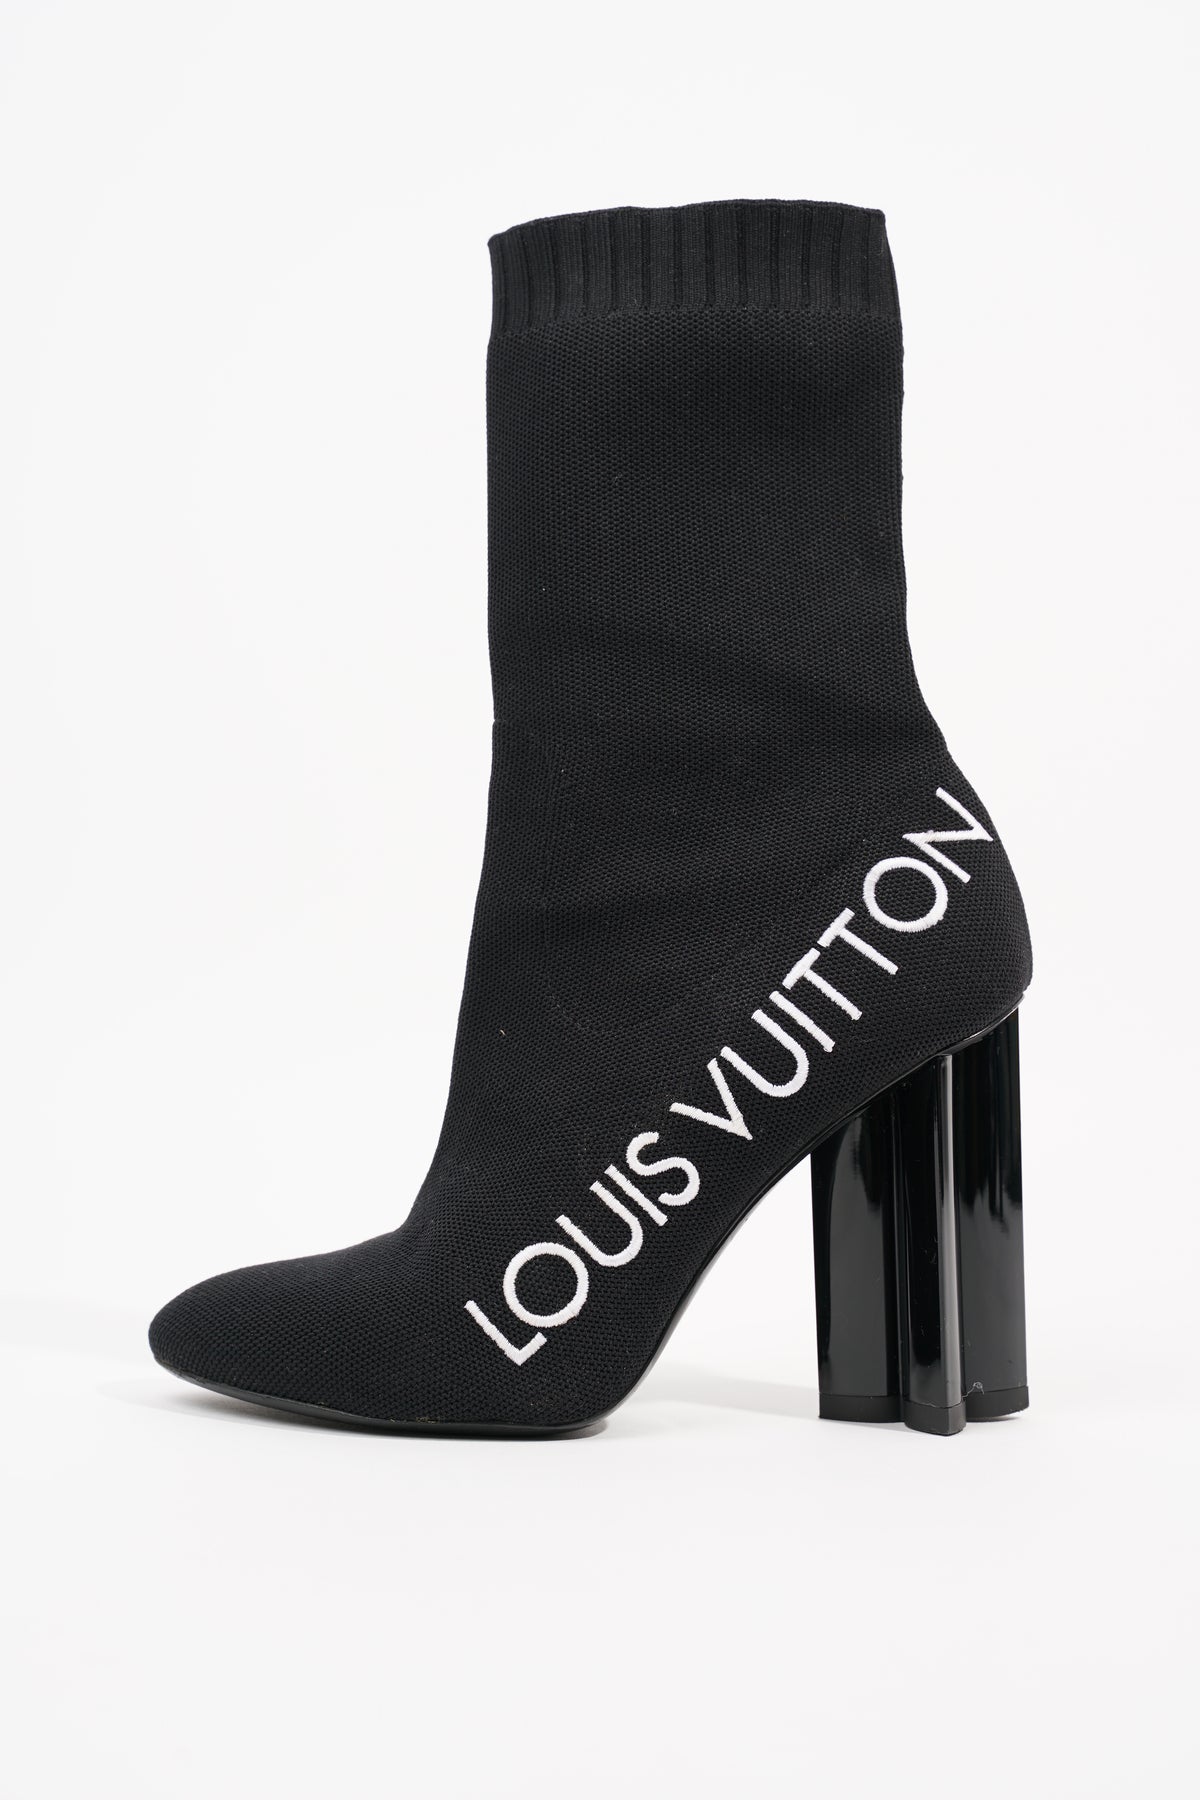 Louis Vuitton 100mm Silhouette Ankle Boots in Burgundy Patent